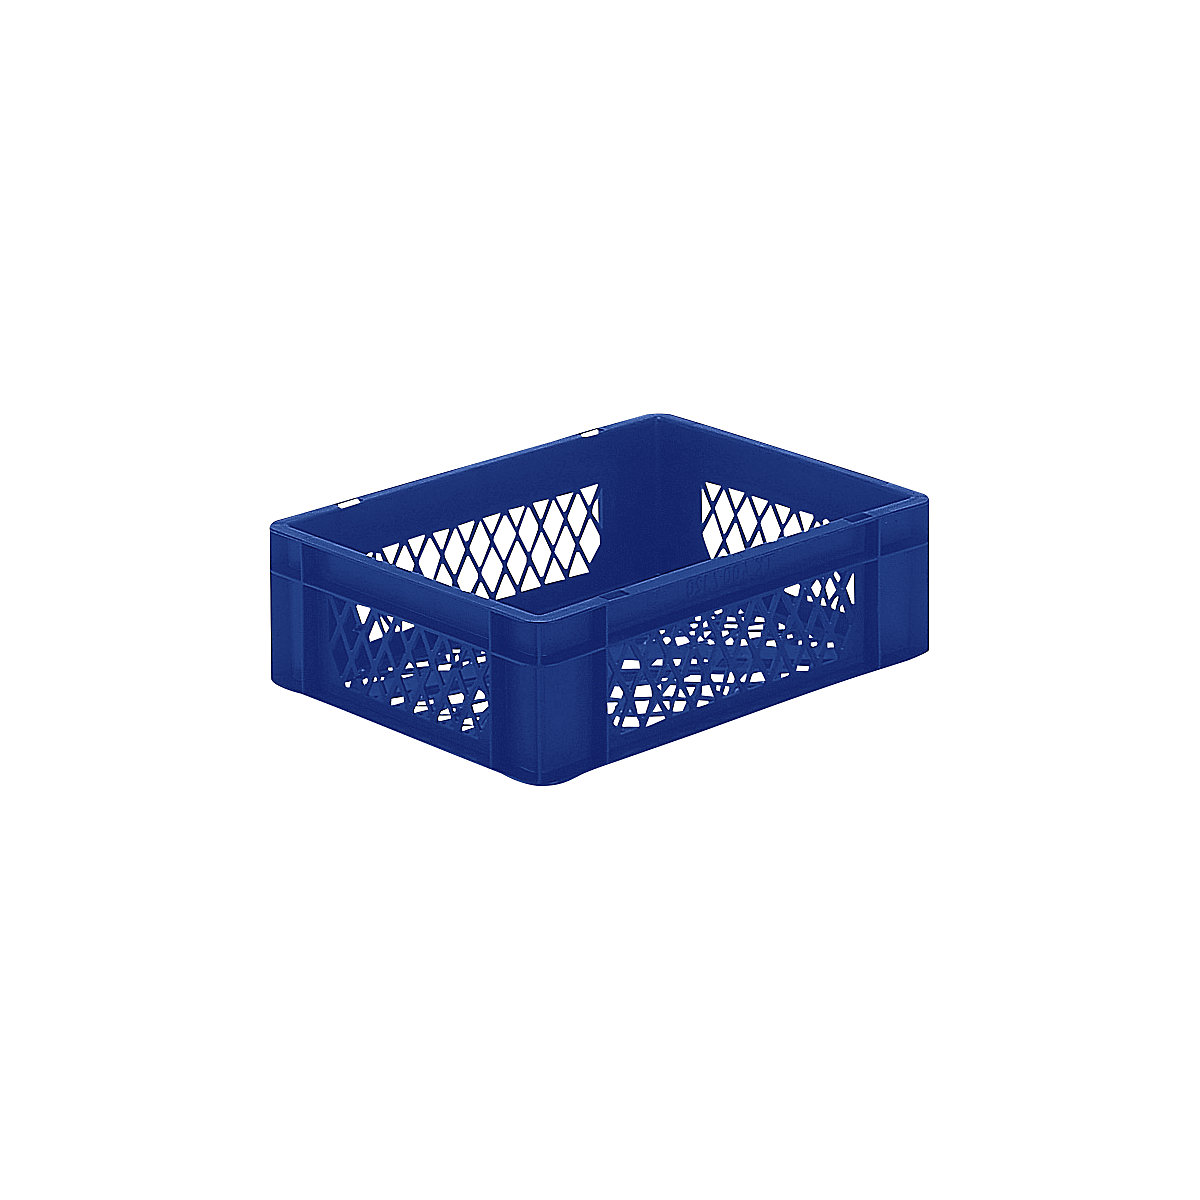 Euro stacking container, perforated walls and base, LxWxH 400 x 300 x 120 mm, blue, pack of 5-5